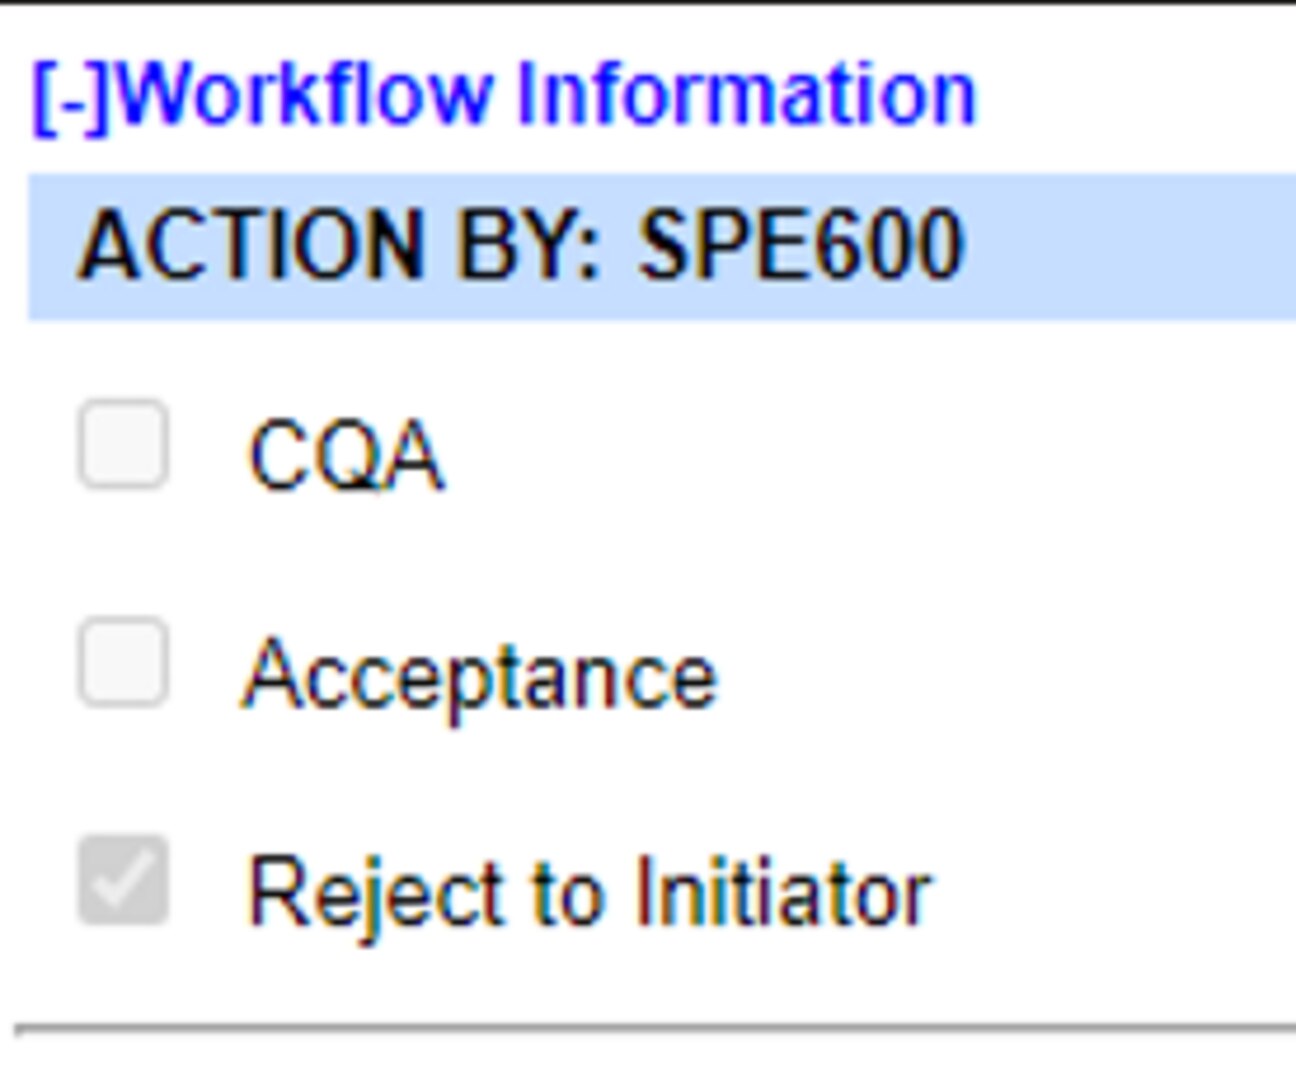 Action By: Acceptor Number in WAWF has a check mark beside Reject to Initiator label